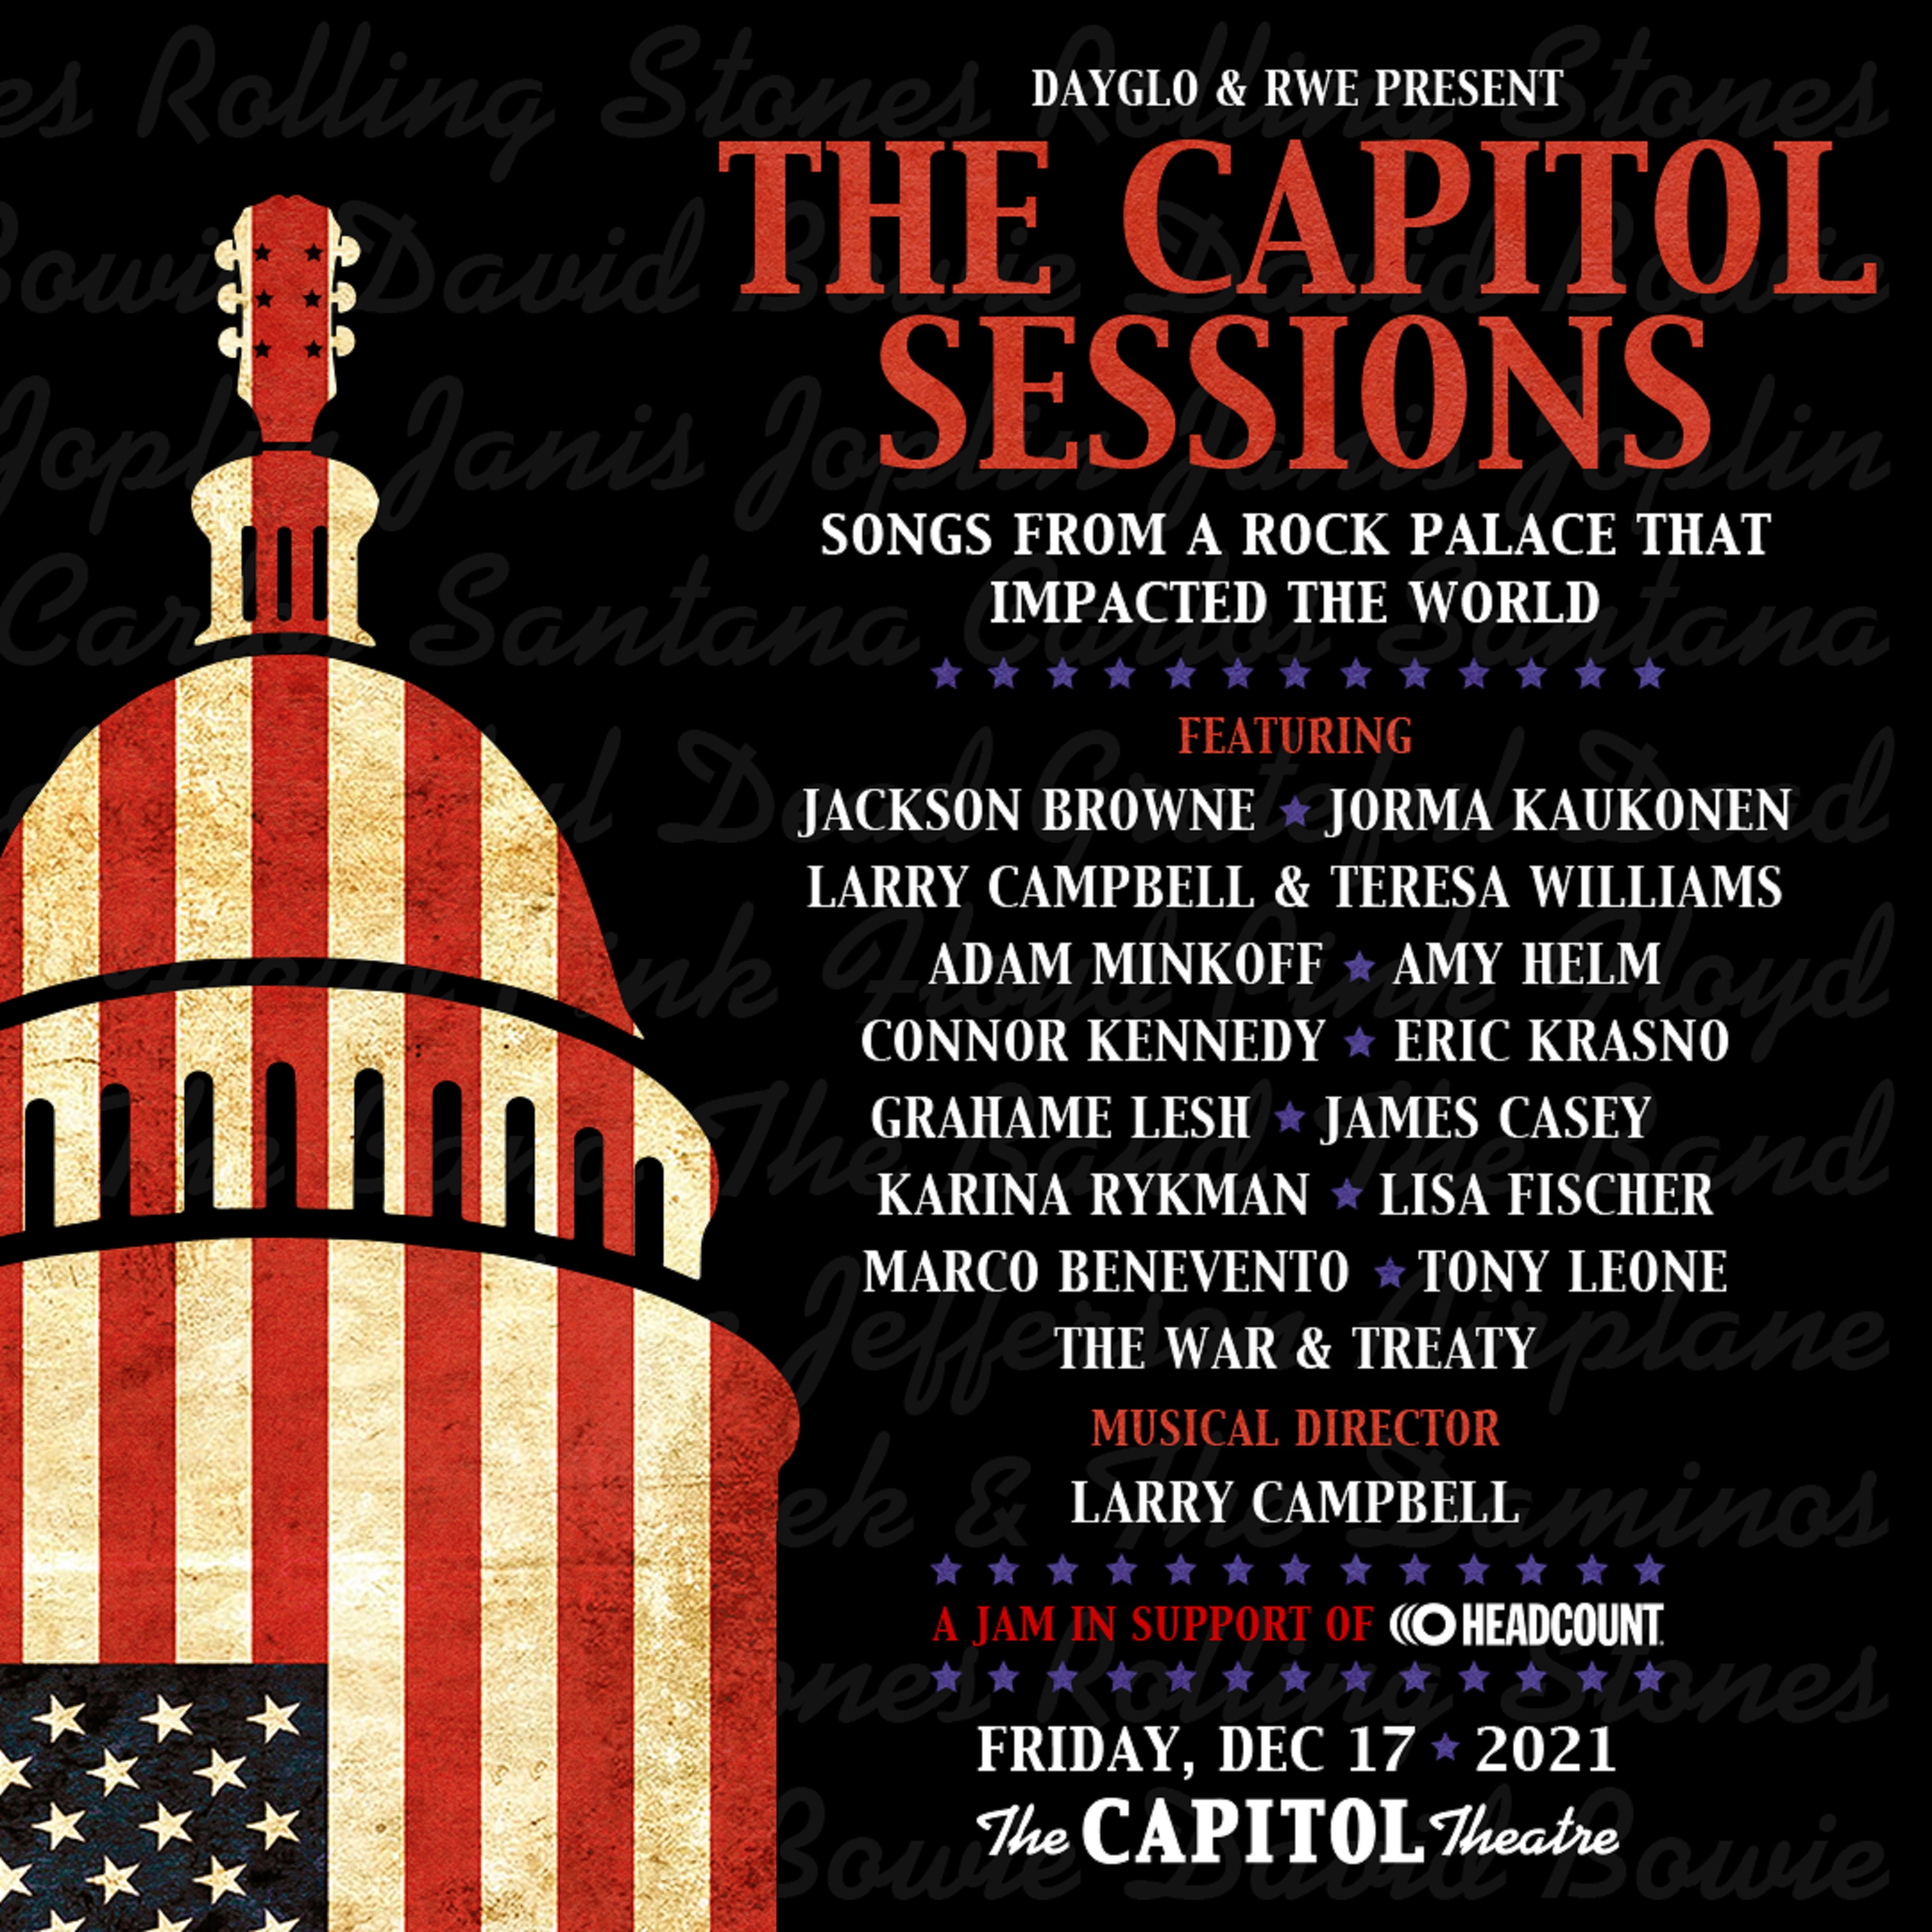 'The Capitol Sessions' on Dec 17 feat Jackson Browne, Jorma Kaukonen, Amy Helm & More in Support of Headcount